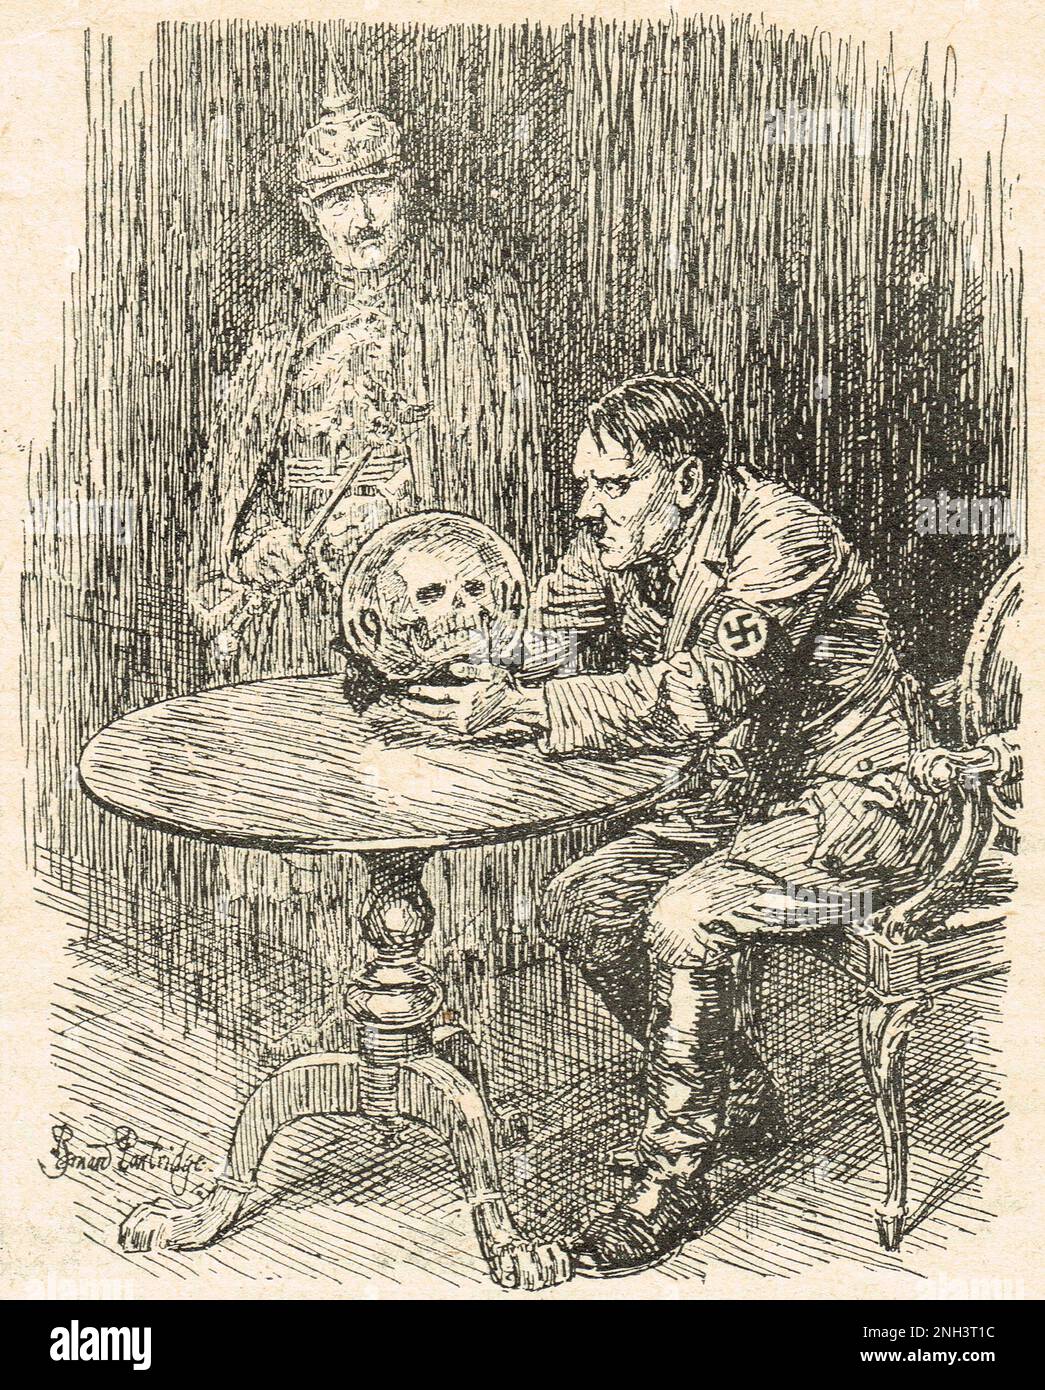 The Crystal gazer. 1939 ww2 cartoon by Bernard Partridge showing Adolf Hitler staring into a crystal ball as the ghost of the Former German Emperor Wilhelm II looks on.  The ball reveals a skull and the year 1914 referencing back to the horrors of the first world war.  Hitler was known to believe in paranormal forecasting, and it may also be an oblique reference to Kristallnacht the crystal night pogroms of the previous year. Stock Photo